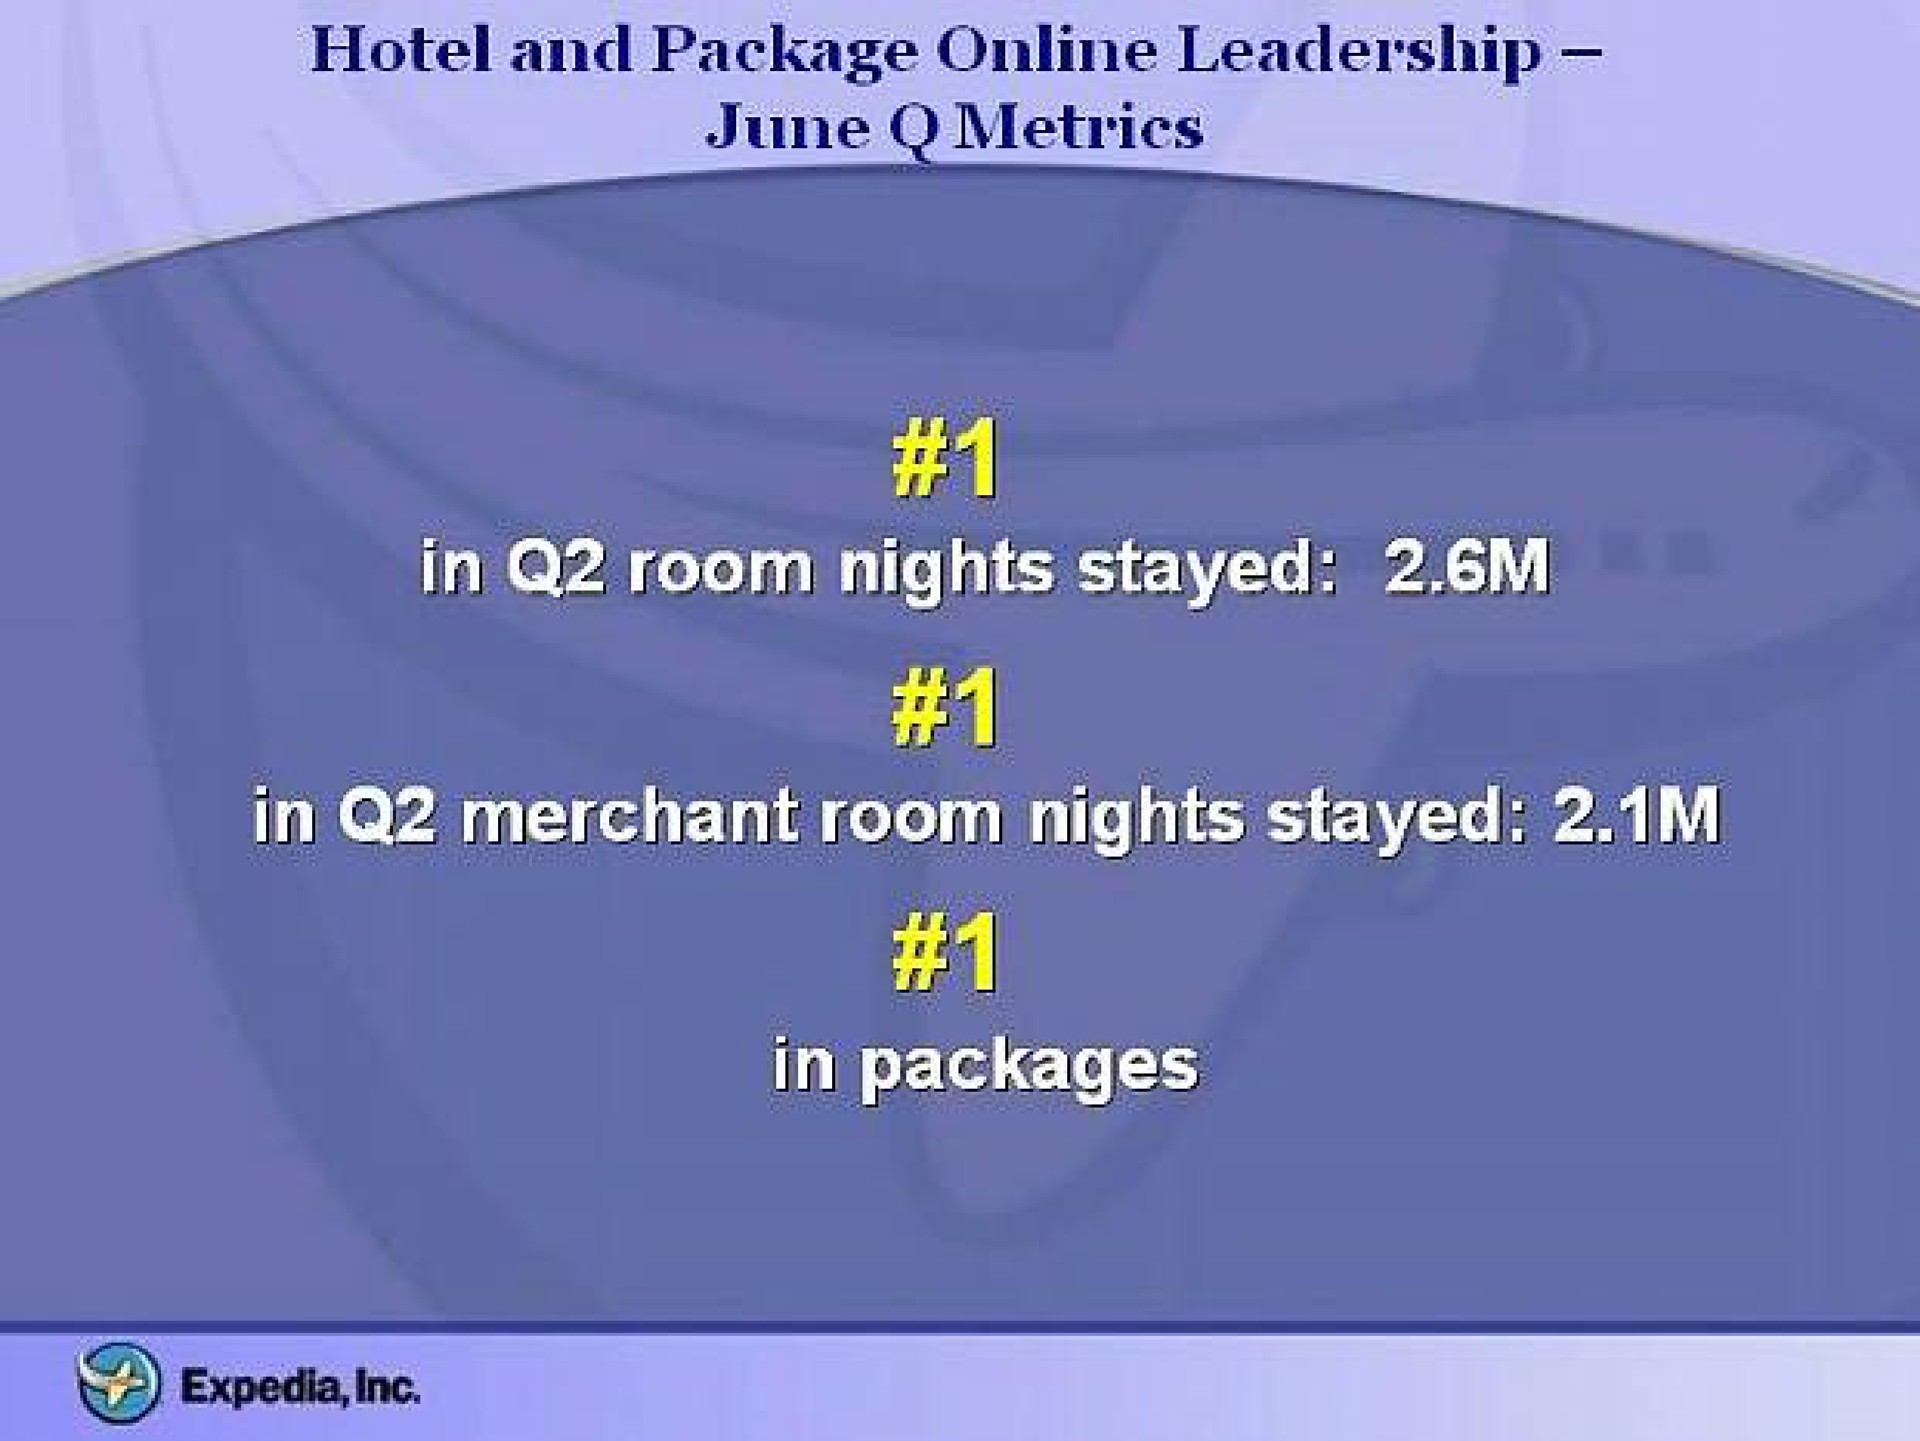 hotel and package leadership june metrics in room nights stayed in merchant room nights stayed in packages | Expedia